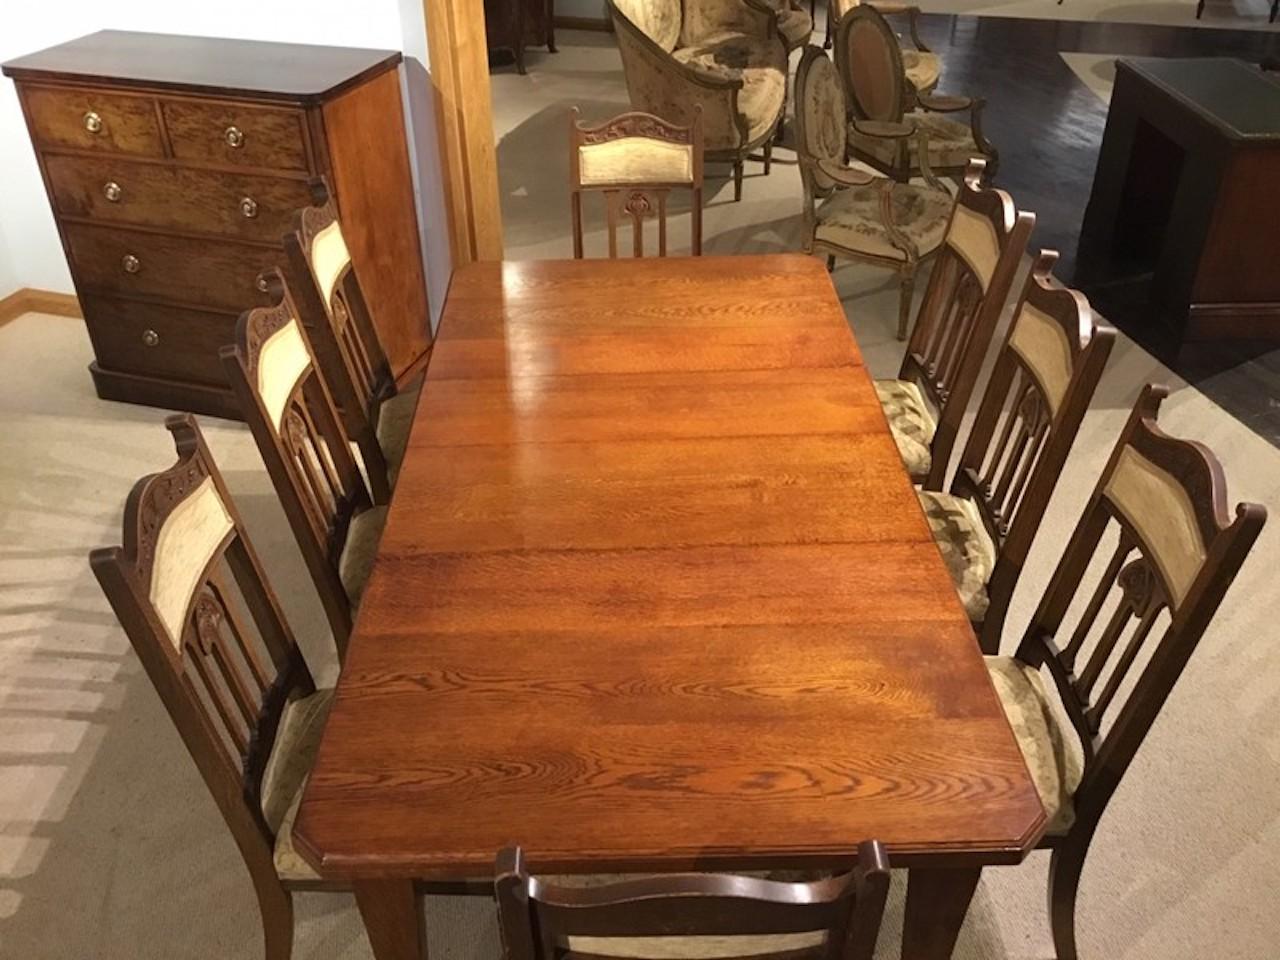 An oak Arts & Crafts Period extending dining table and 8 chairs. The table with a solid oak top with canted corners and two additional leaf inserts. This table is quite versatile and can be used to sit 4,6 or 8 people. Extending by winding mechanism